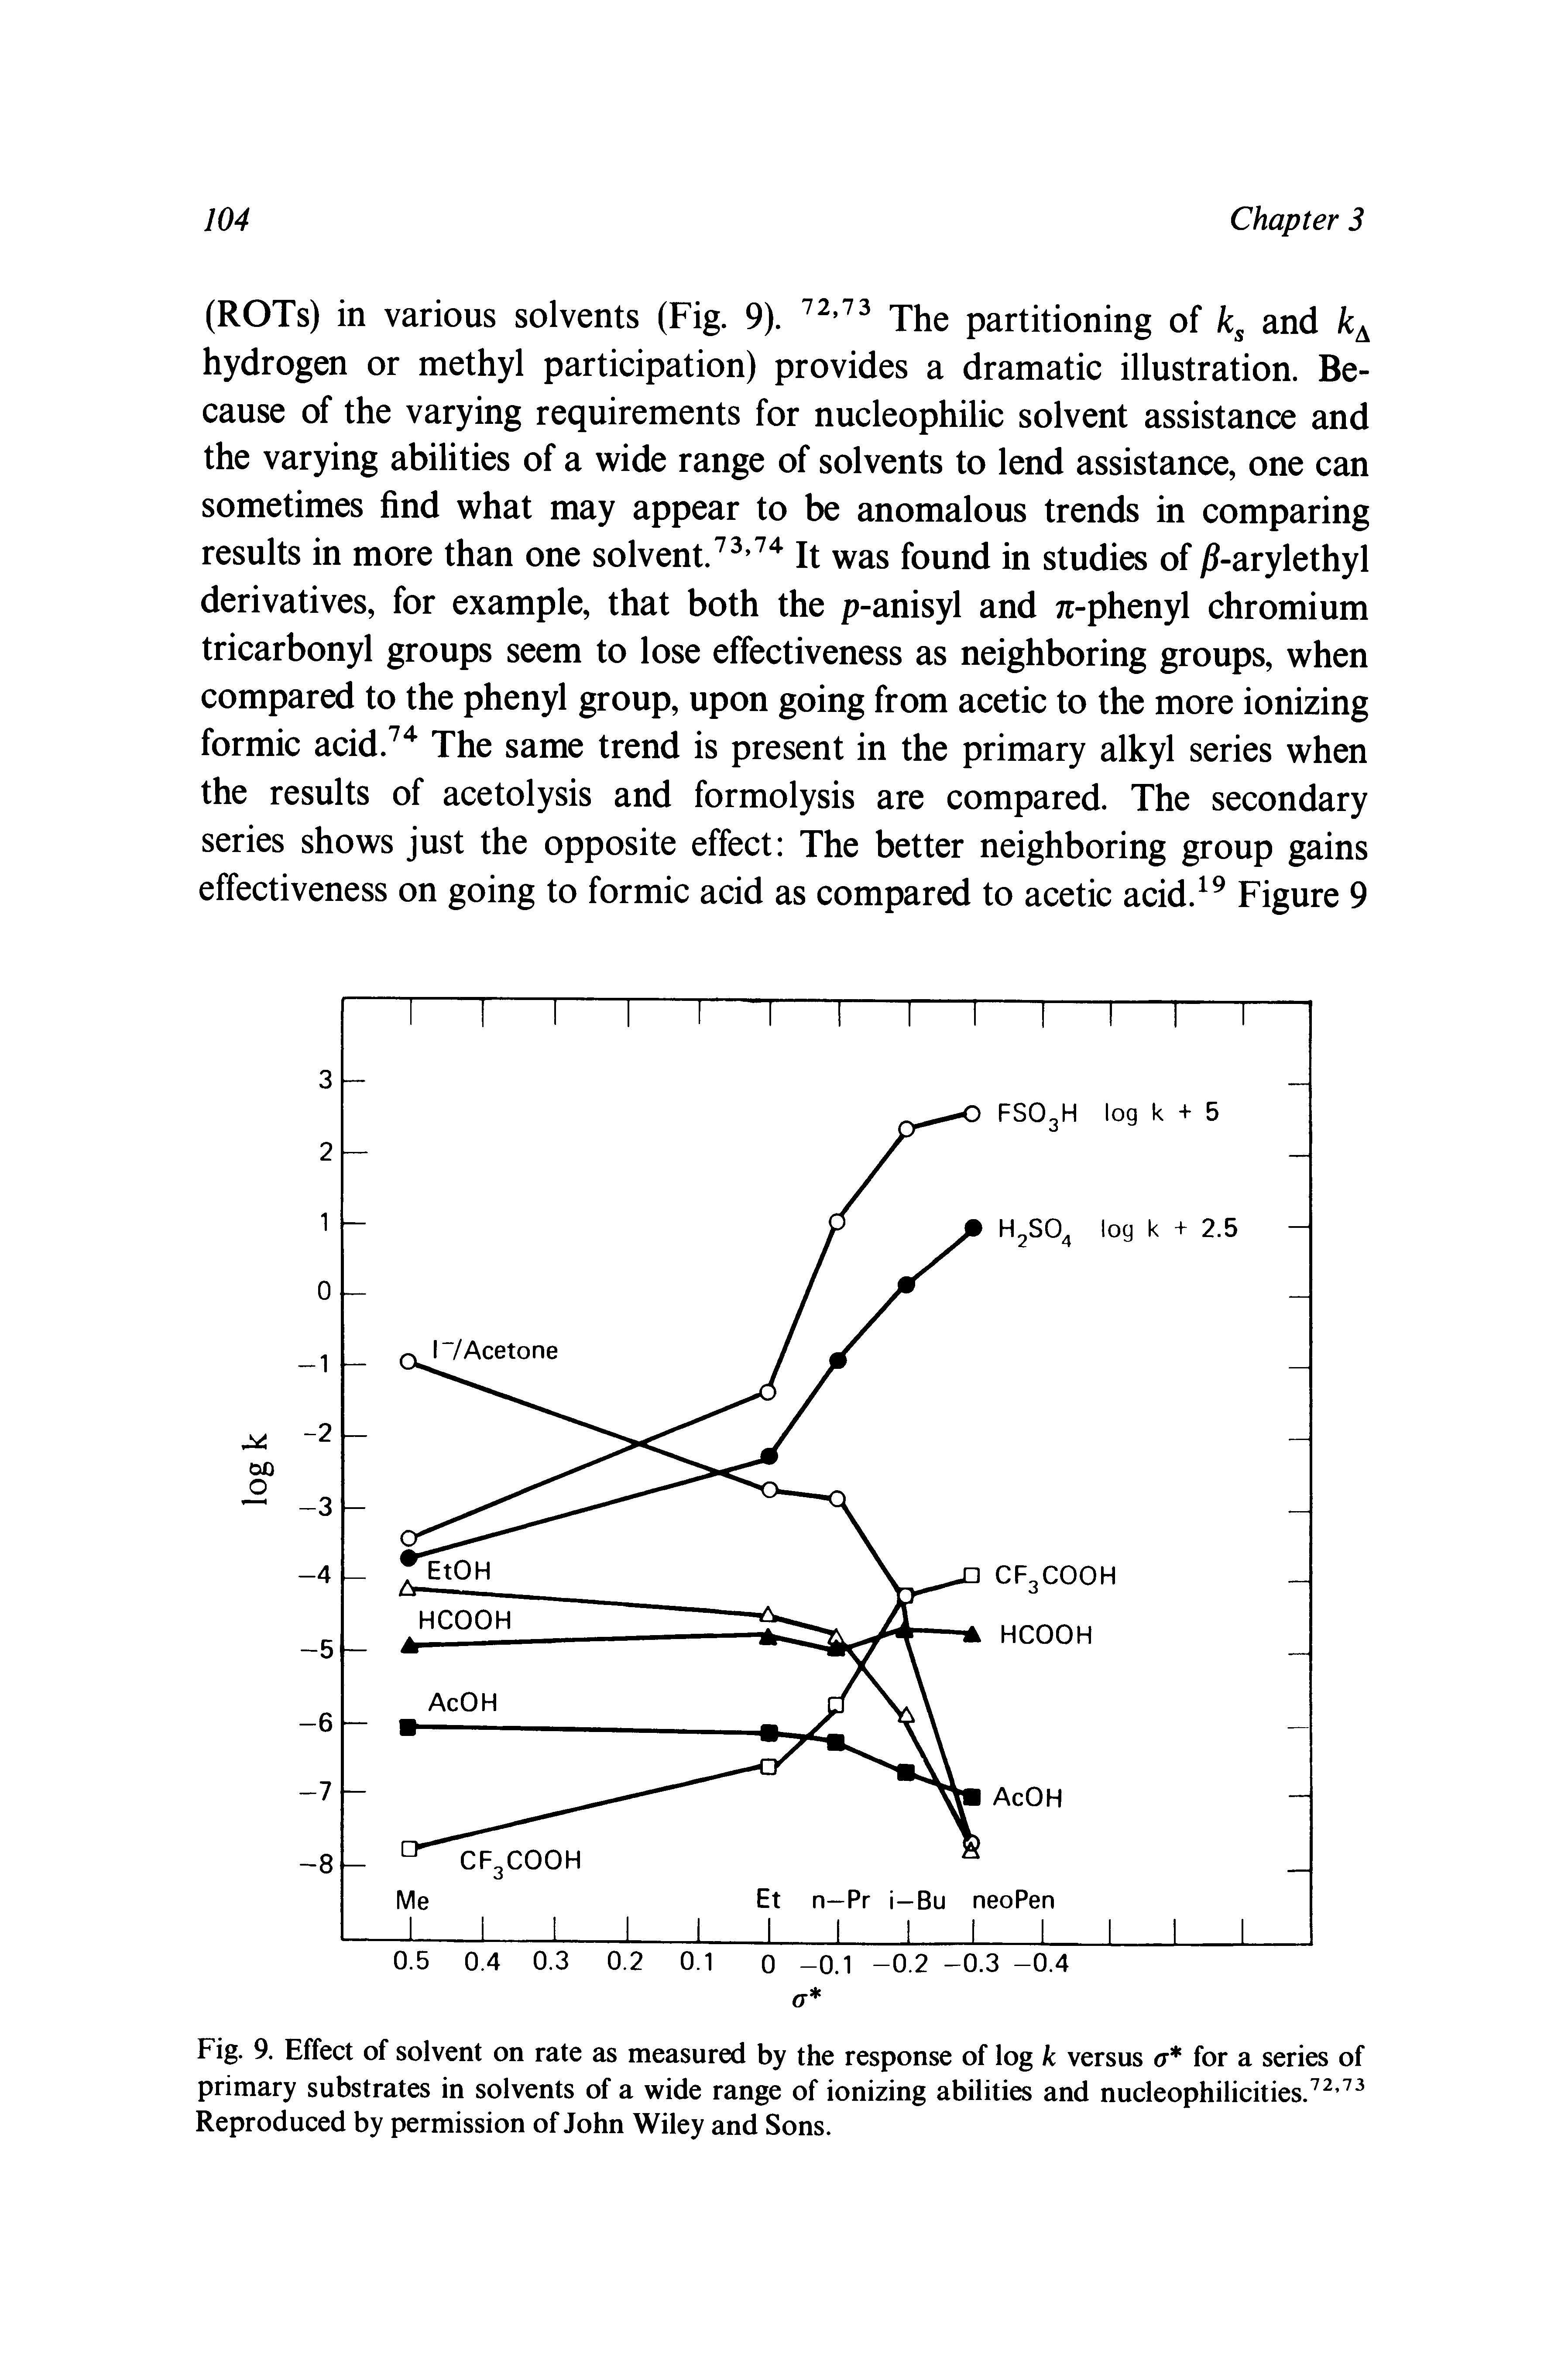 Fig. 9. Effect of solvent on rate as measured by the response of log k versus a for a series of primary substrates in solvents of a wide range of ionizing abilities and nucleophilicities. Reproduced by permission of John Wiley and Sons.